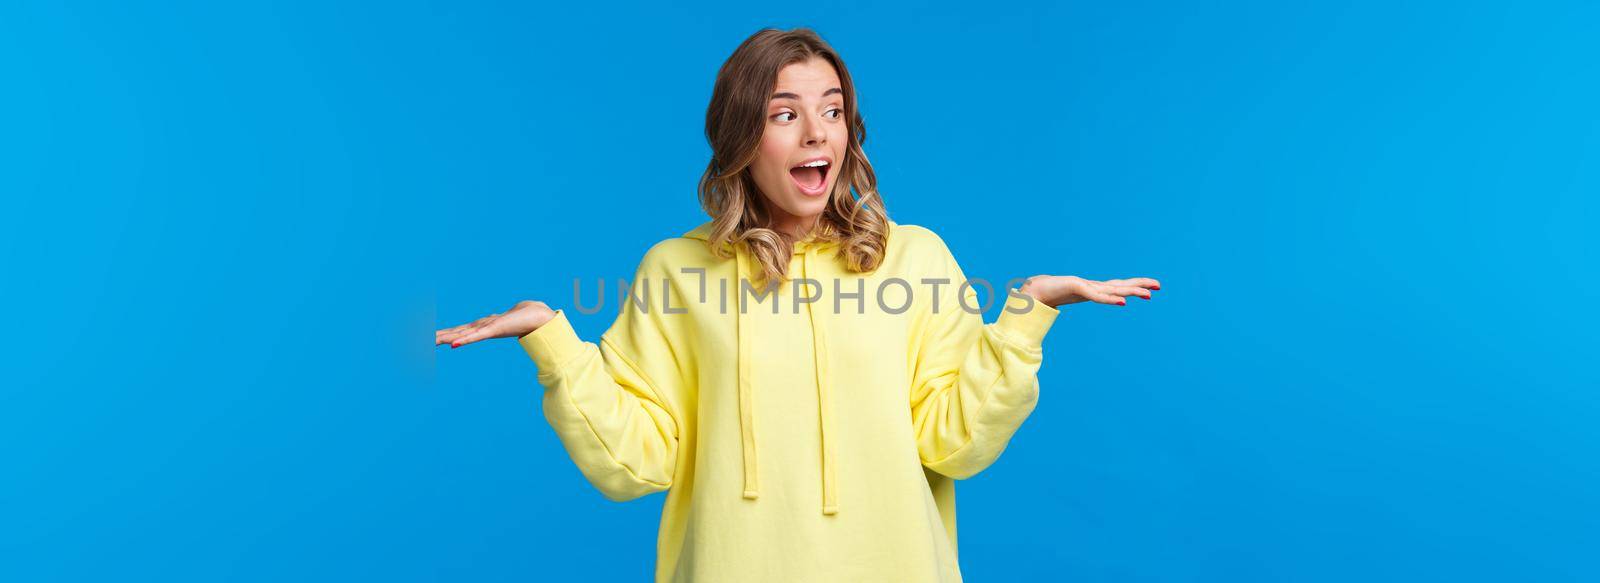 Girl weighing two choices as making decision, look away picking between products she holding in arms on left and right side, standing excited over blue background by Benzoix